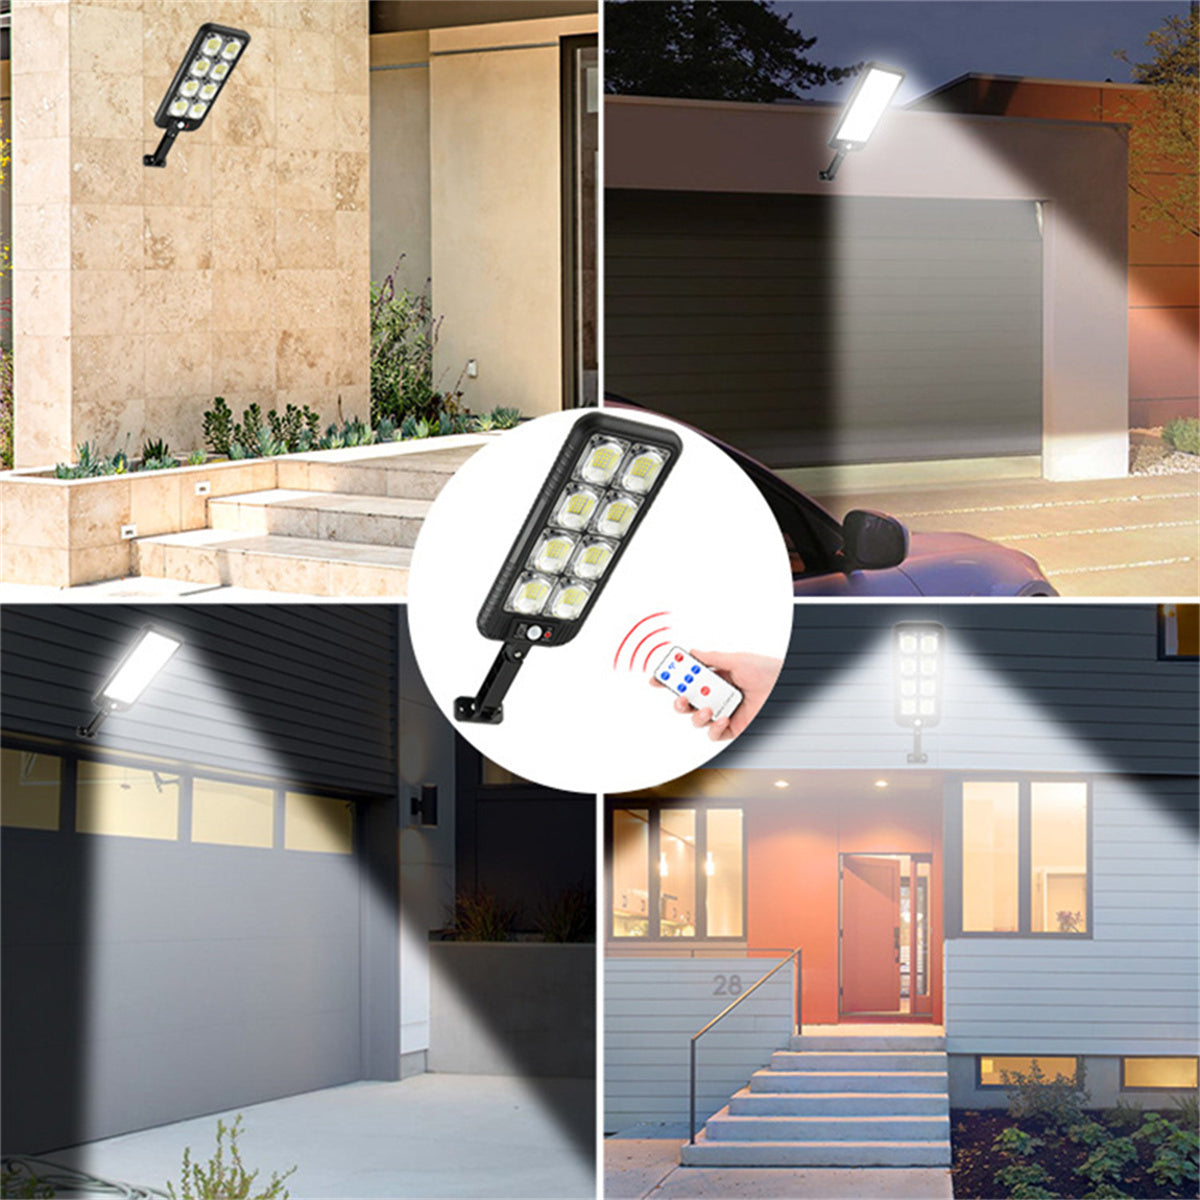 1800W Solar Street Light Outdoor, Solar Motion Sensor Lights Auto On/Off Dusk to Dawn Flood Lights with Remote Control for Yard, Garden, Patio, Porch